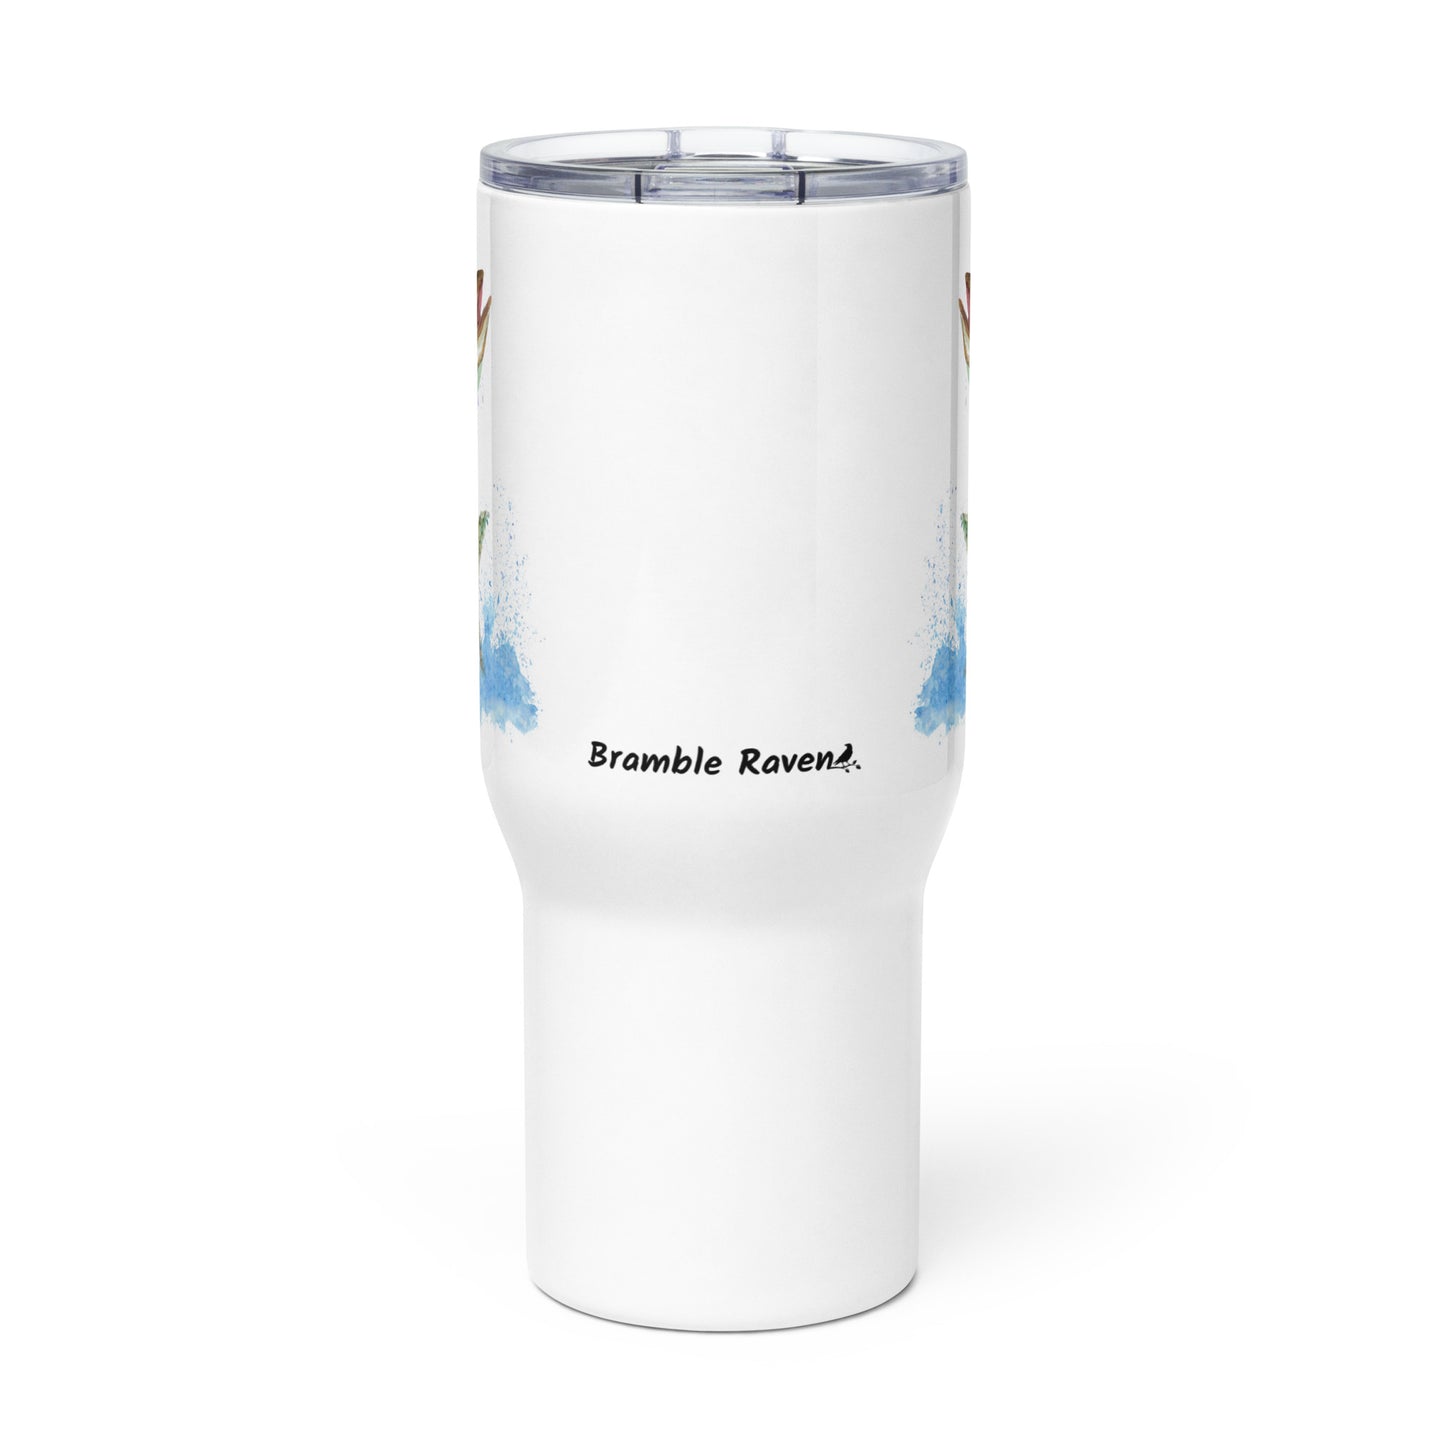 Stainless steel travel mug with handle. Holds 25 ounces of hot or cold drinks. Has print of watercolor rainbow trout fish on both sides. Fits most car cup holders. Comes with spill-proof BPA-free plastic lid. Front view of mug.